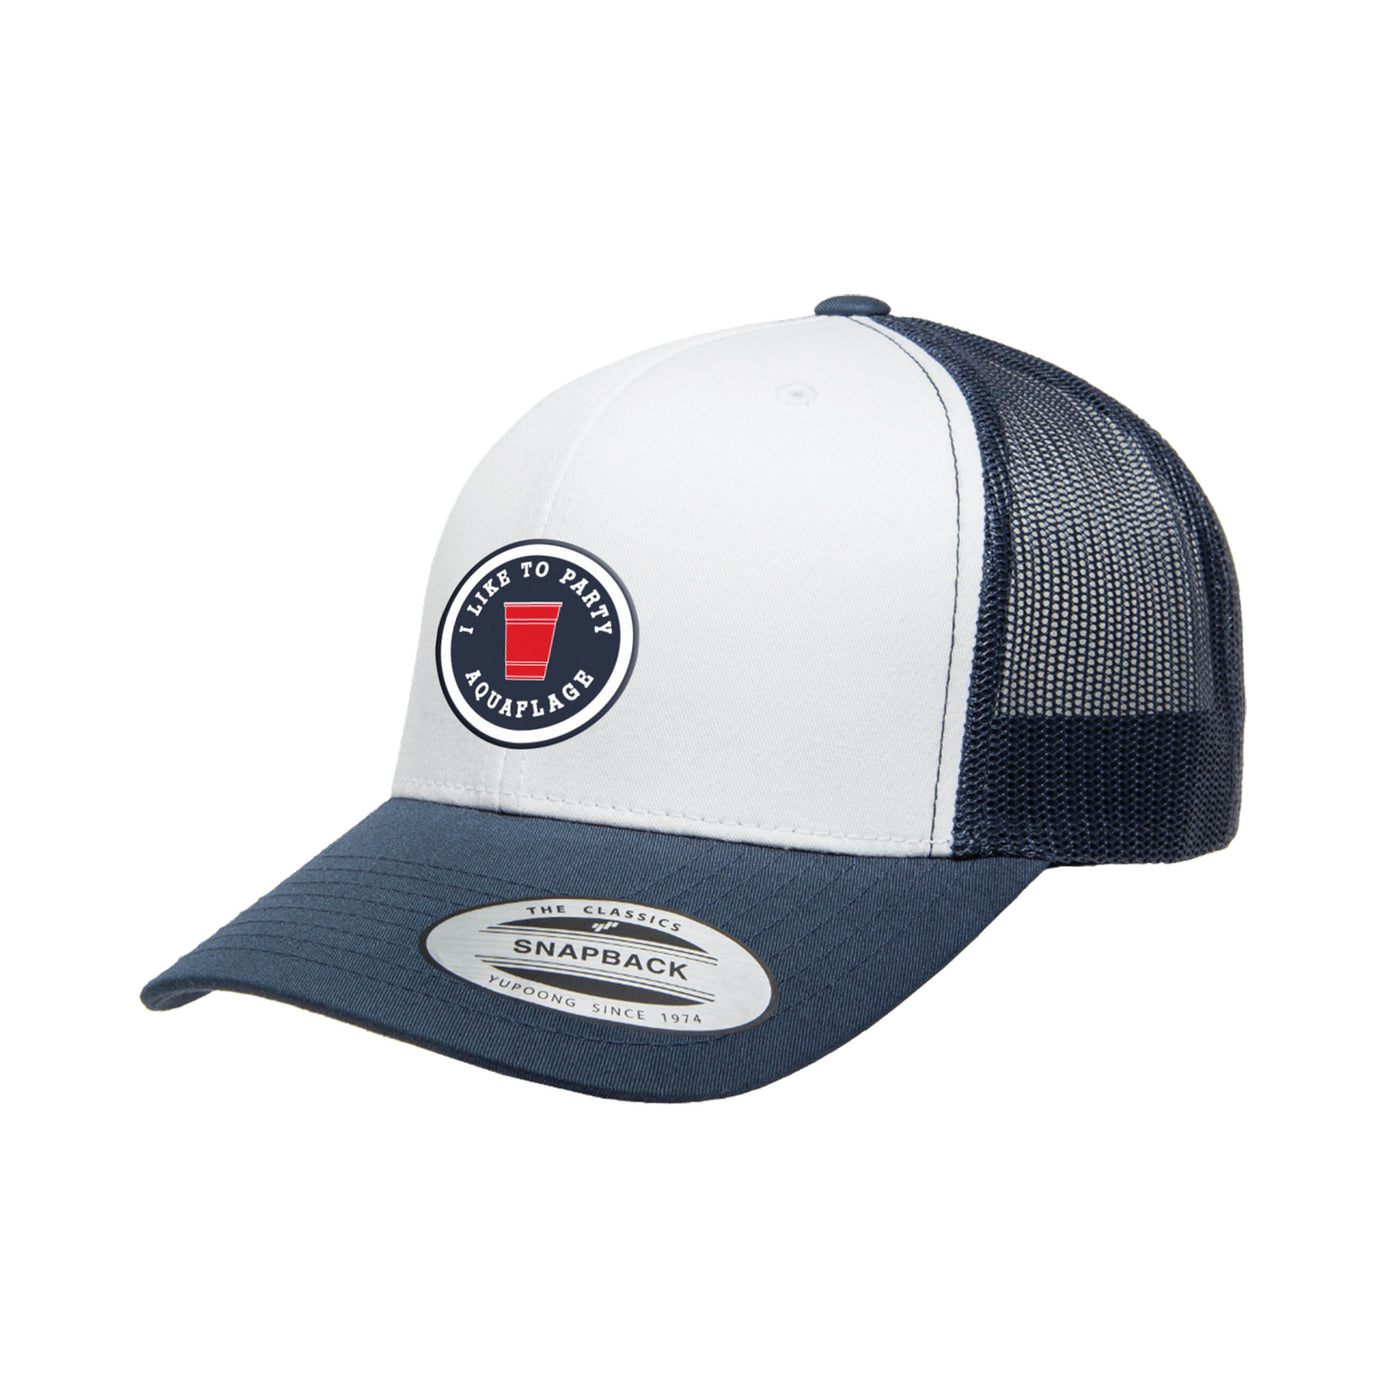 Red Cup Party - Navy Mesh Trucker Hat